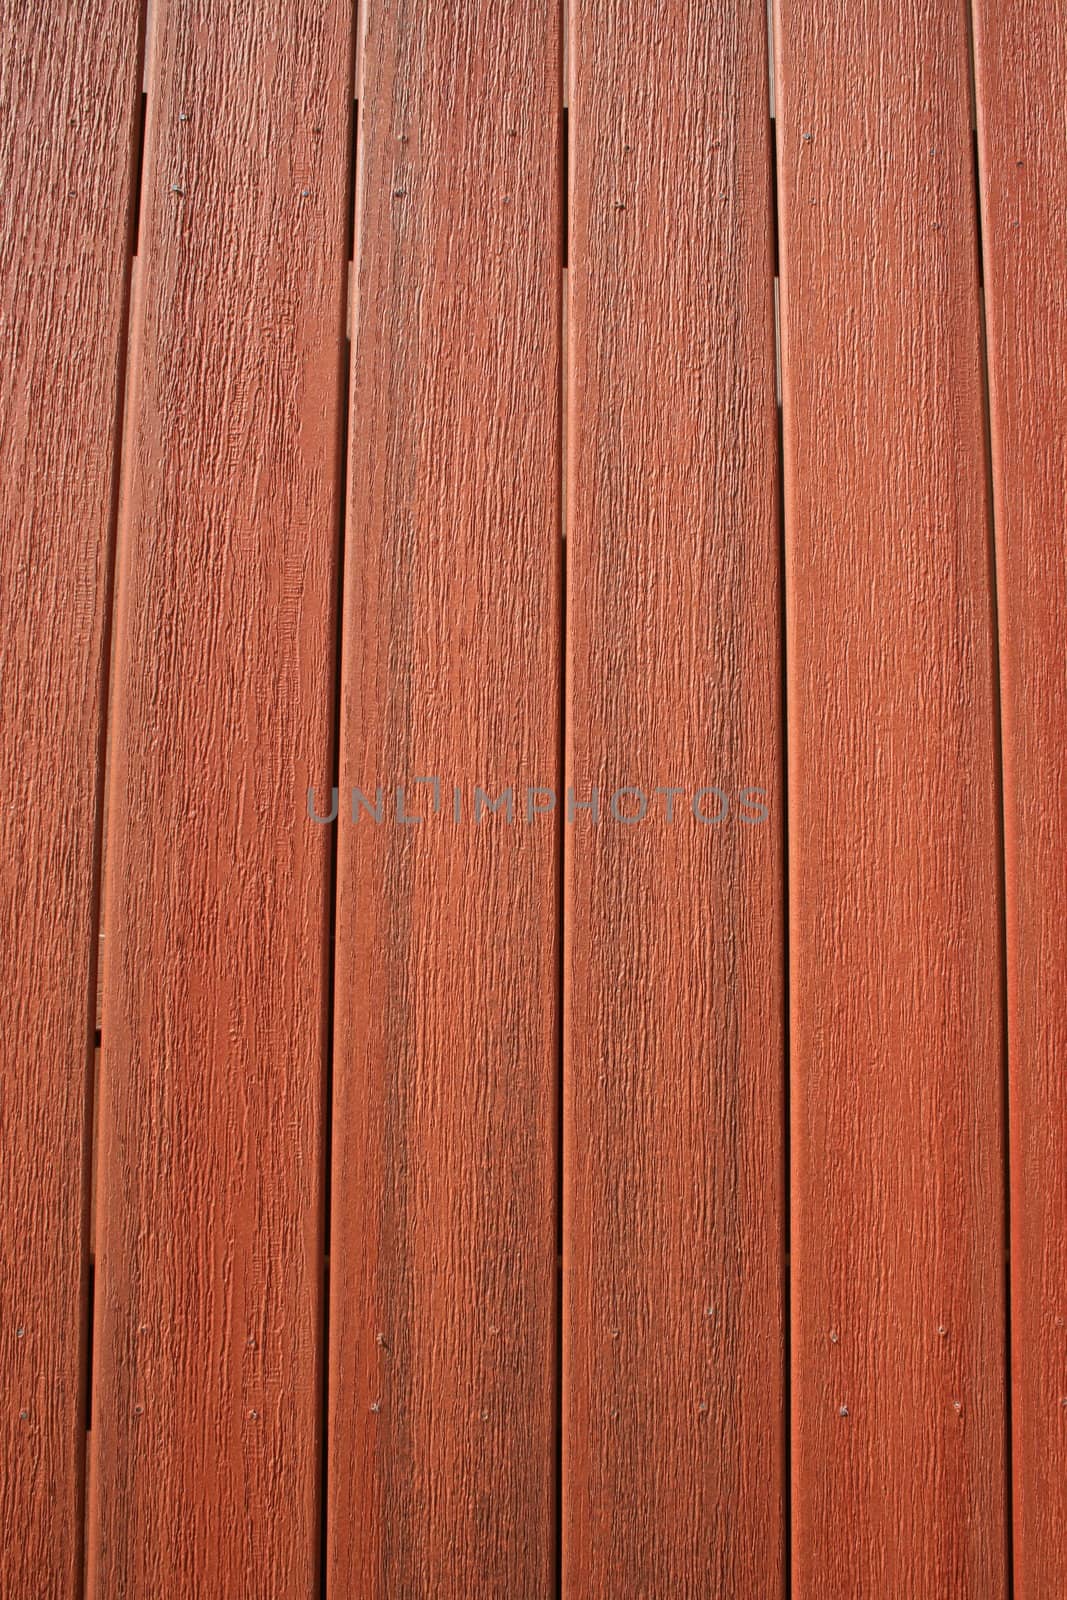 Close up of a wooden wall showing unique pattern.
